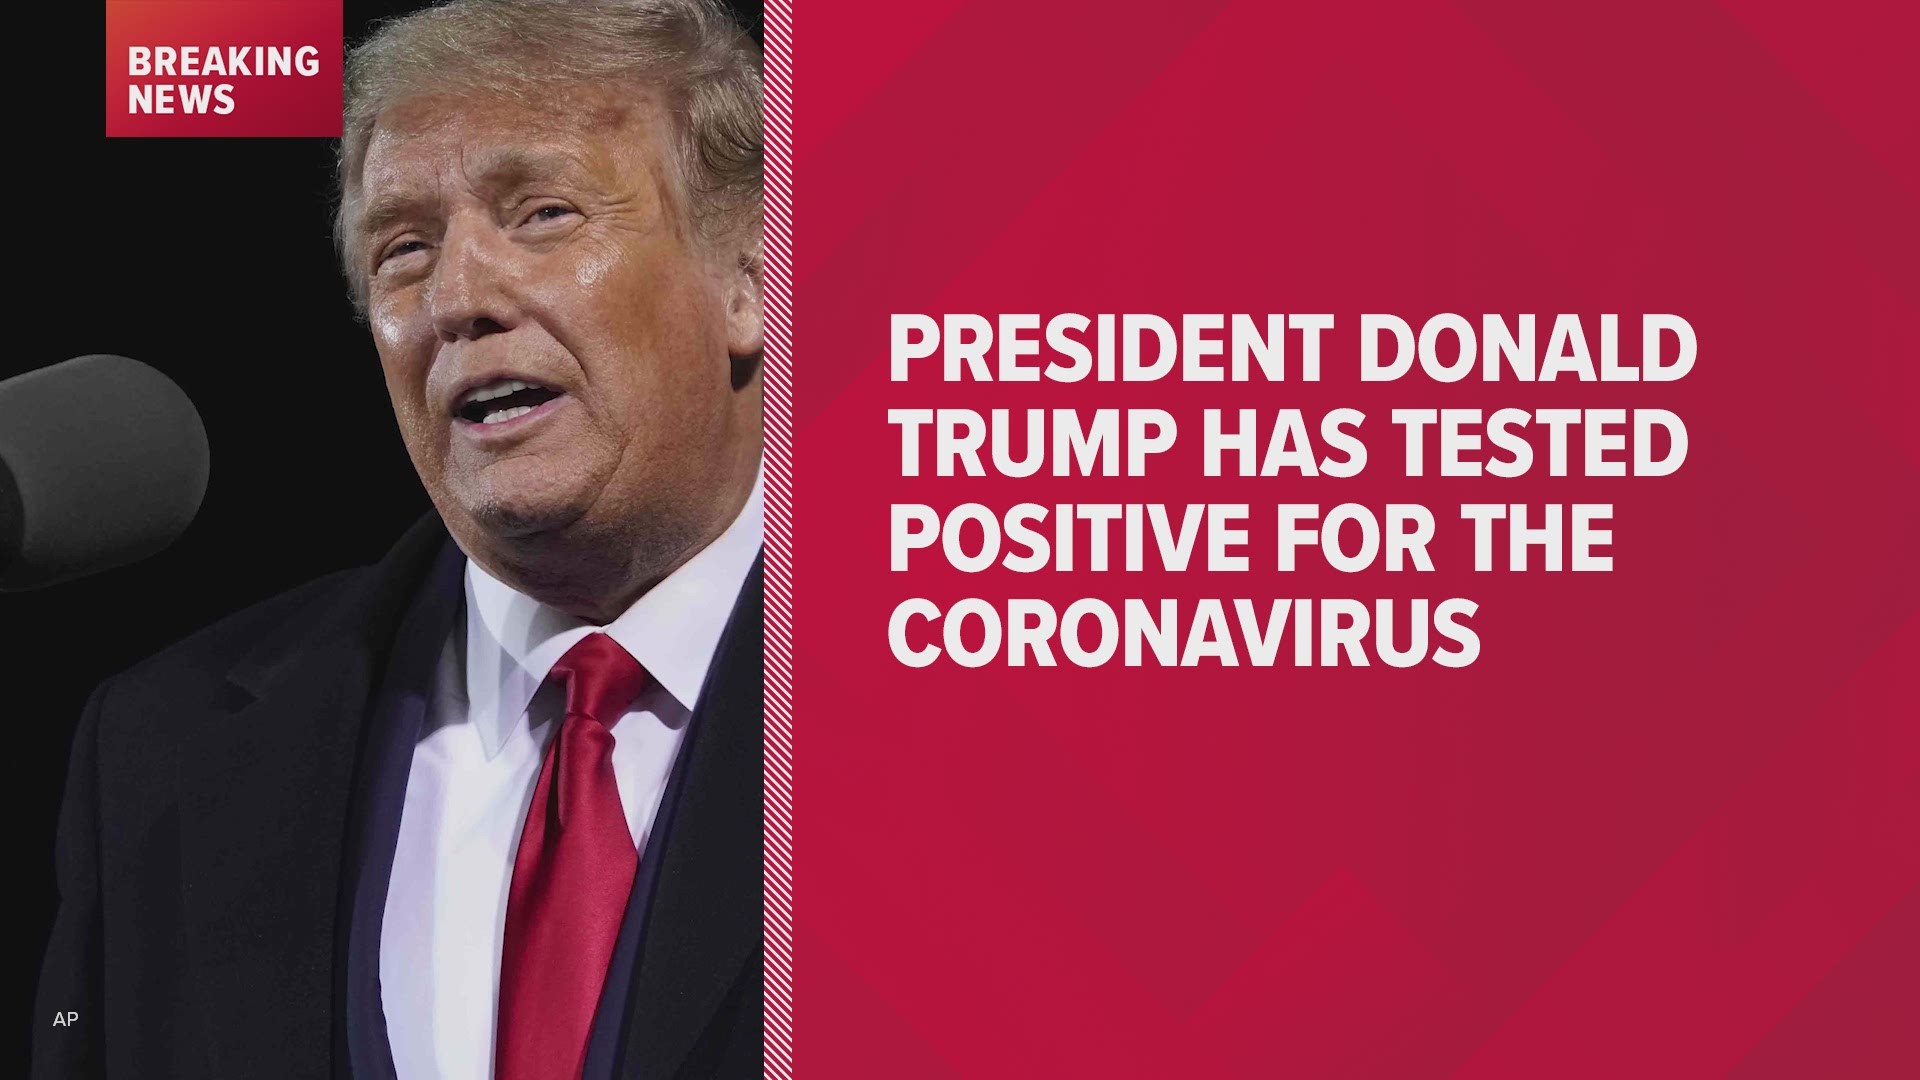 President Donald Trump and first lady Melania Trump have tested positive for the coronavirus, the president tweeted early Friday.